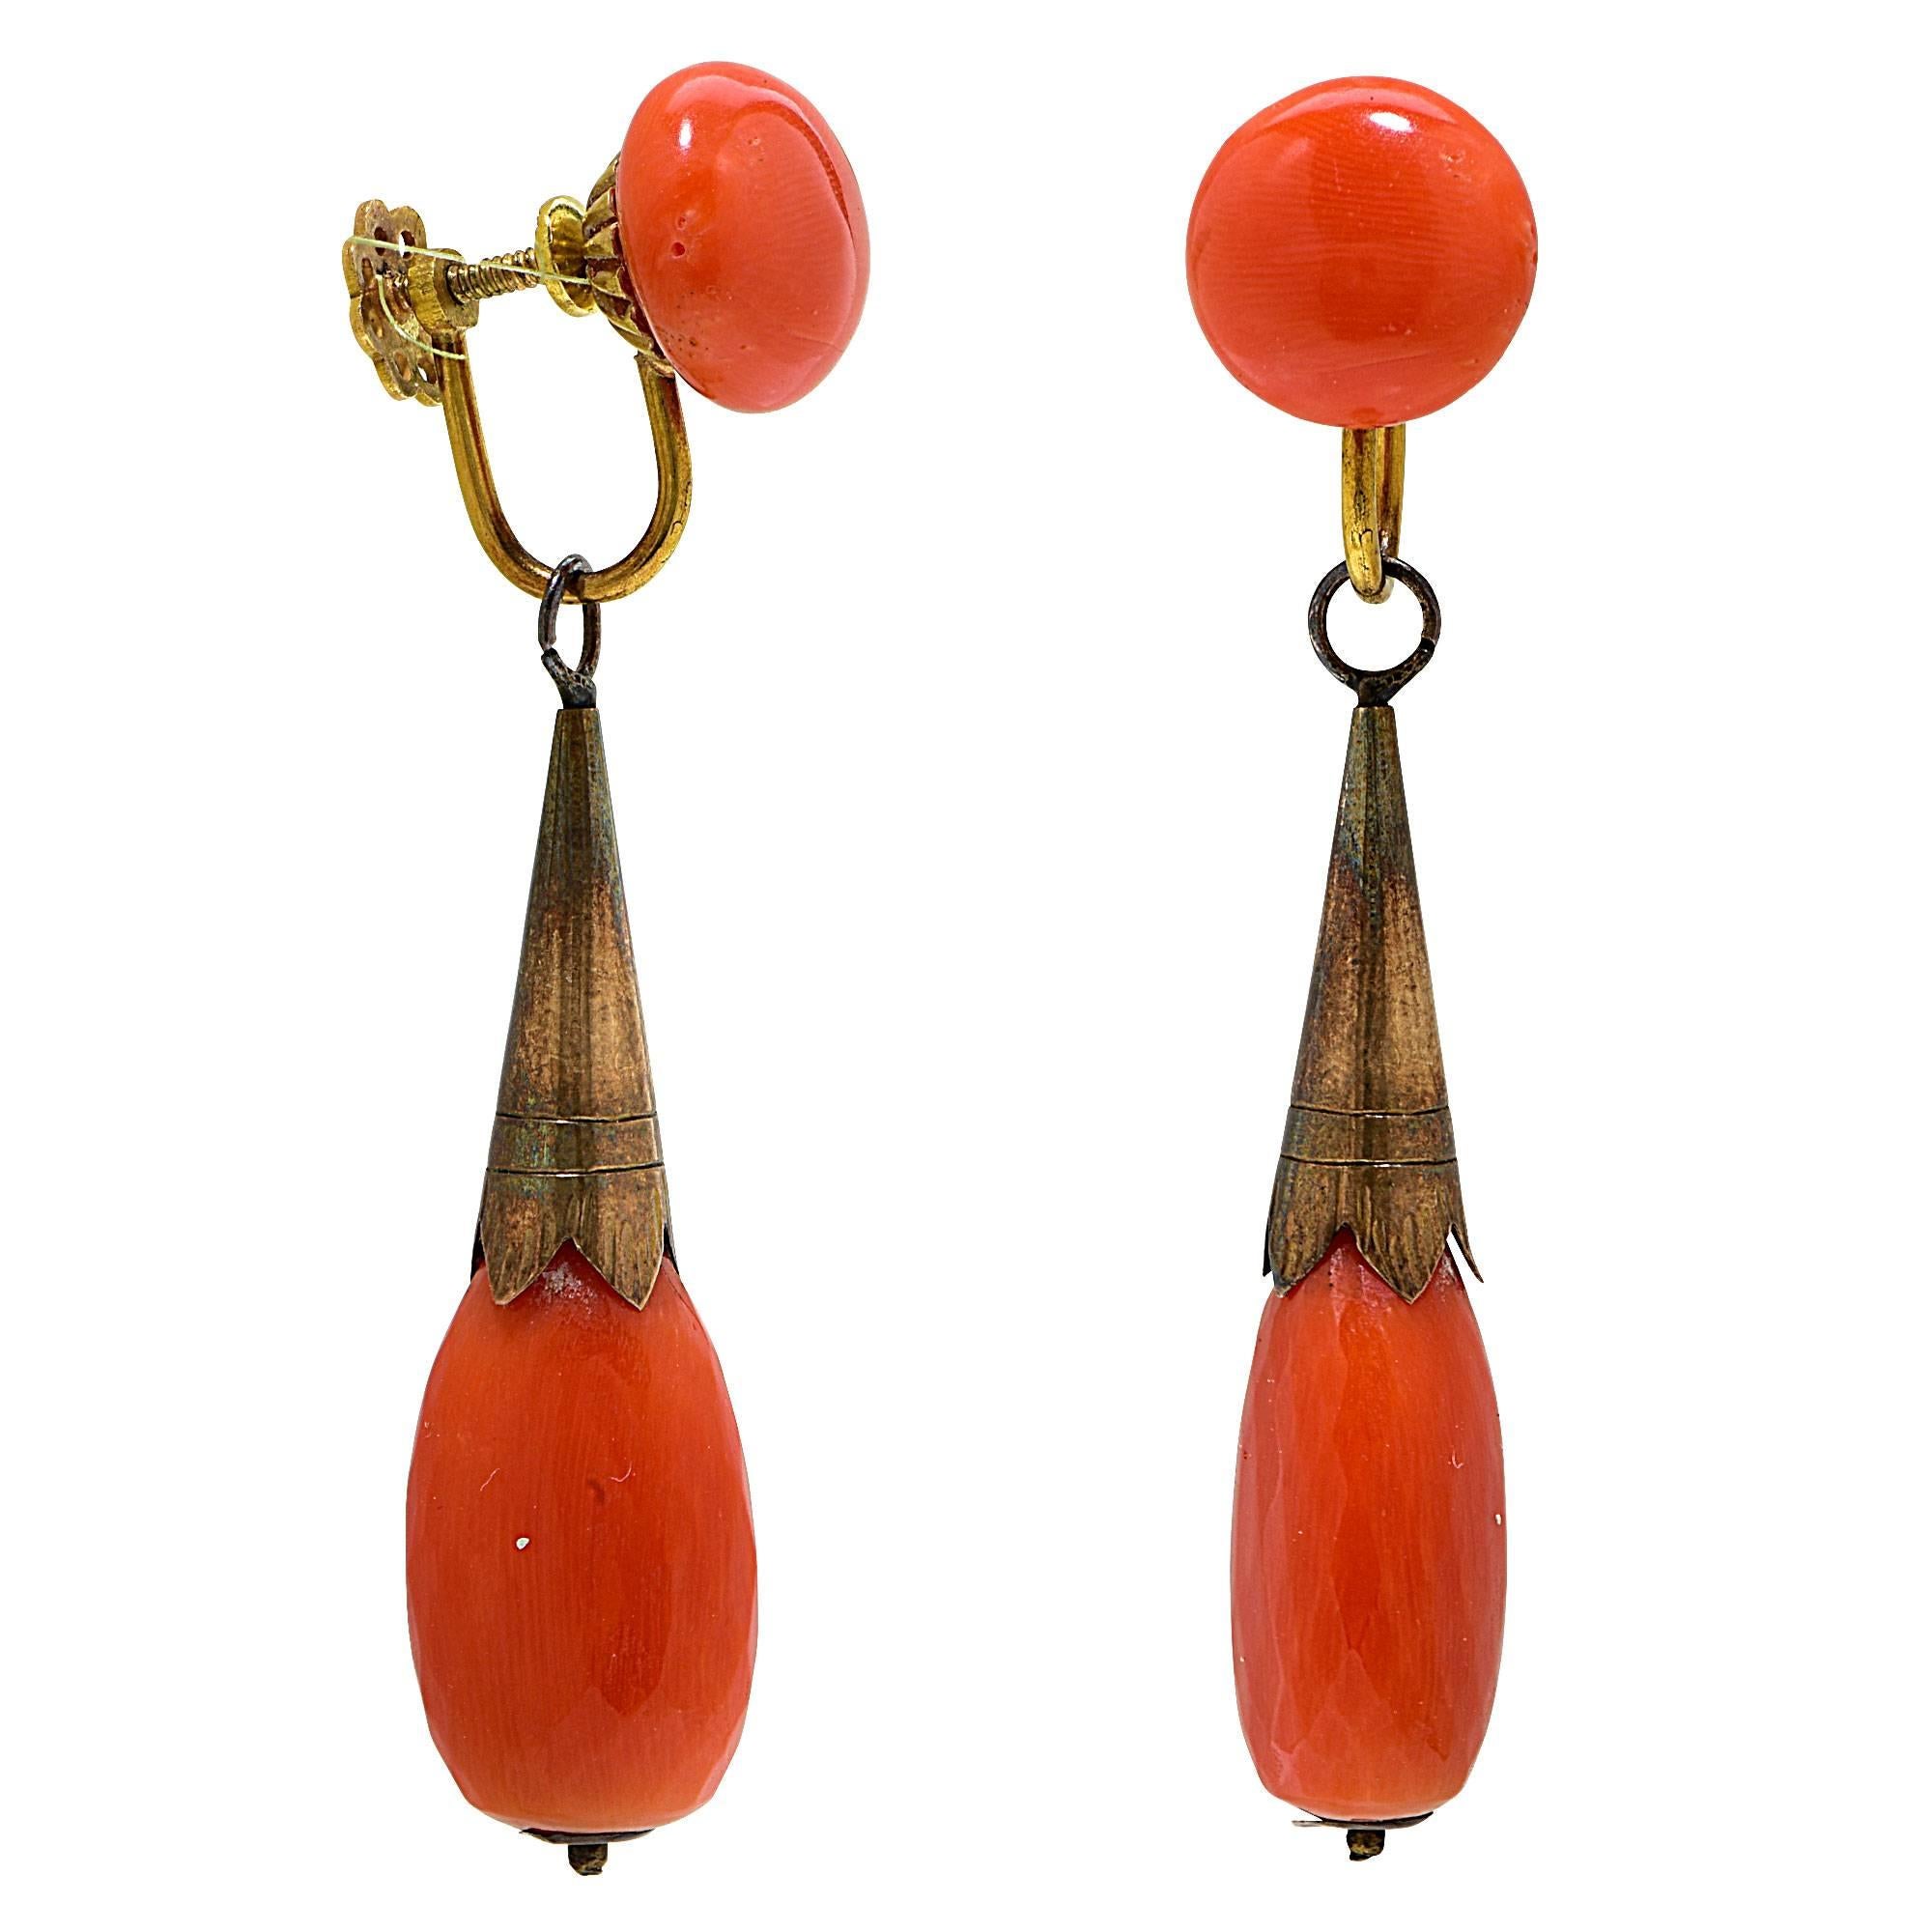 18k yellow gold coral dangle earrings.

The earrings measure 2.30 inches in height by .48 inch in width by .65 inch in depth.
They are stamped and tested as 18k gold.
The metal weight is 14.30 grams.

These coral earrings are accompanied by a